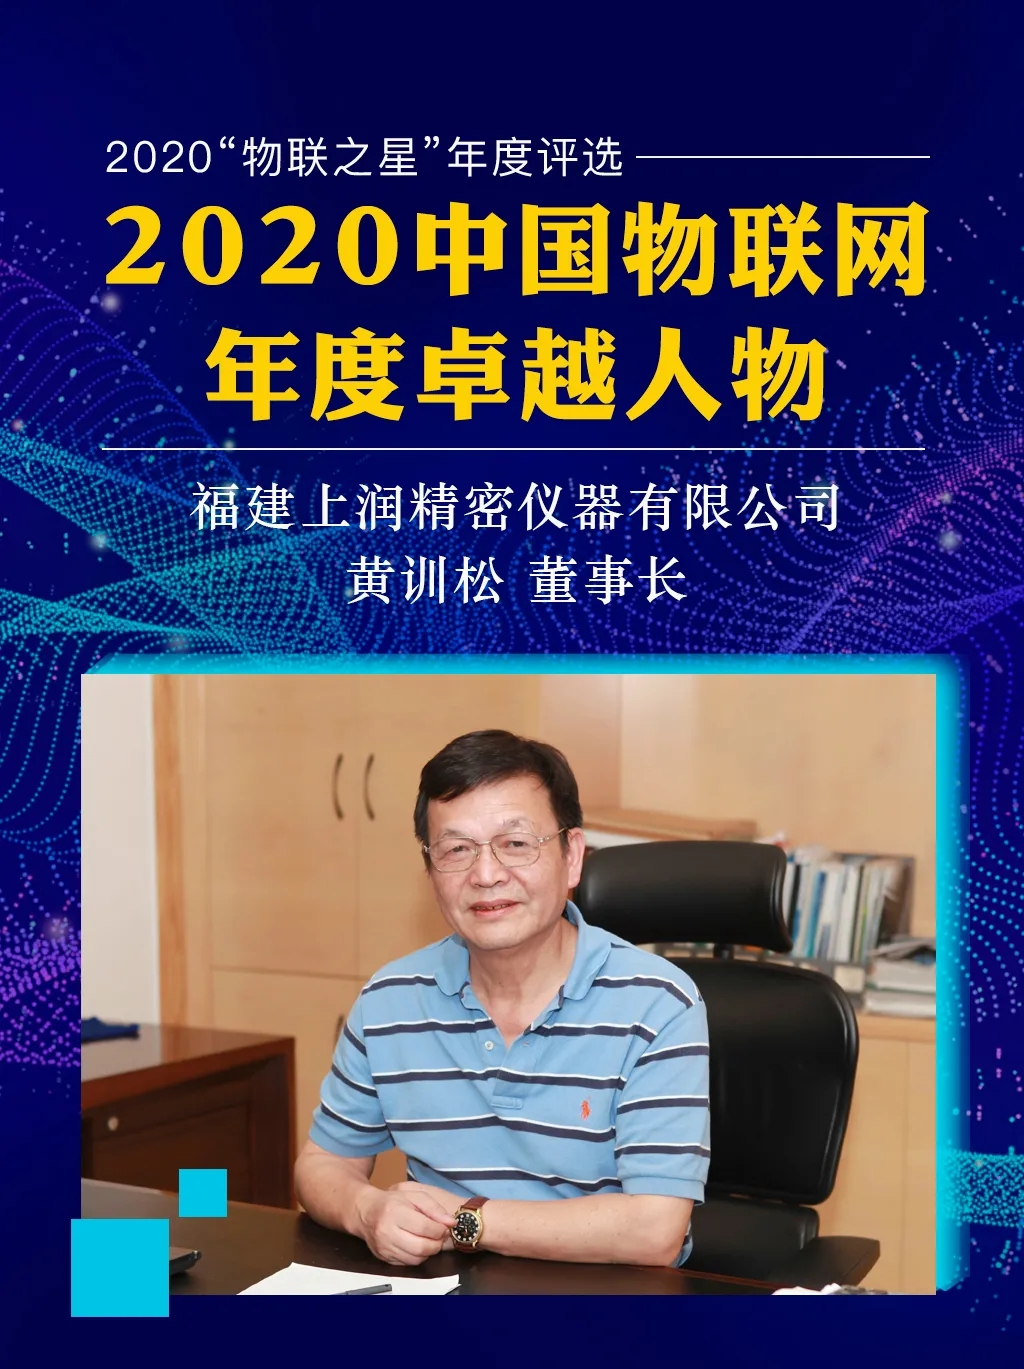 Fujian  WIDE PLUS Huang xunsong selected as“2020 China iot person of the year”